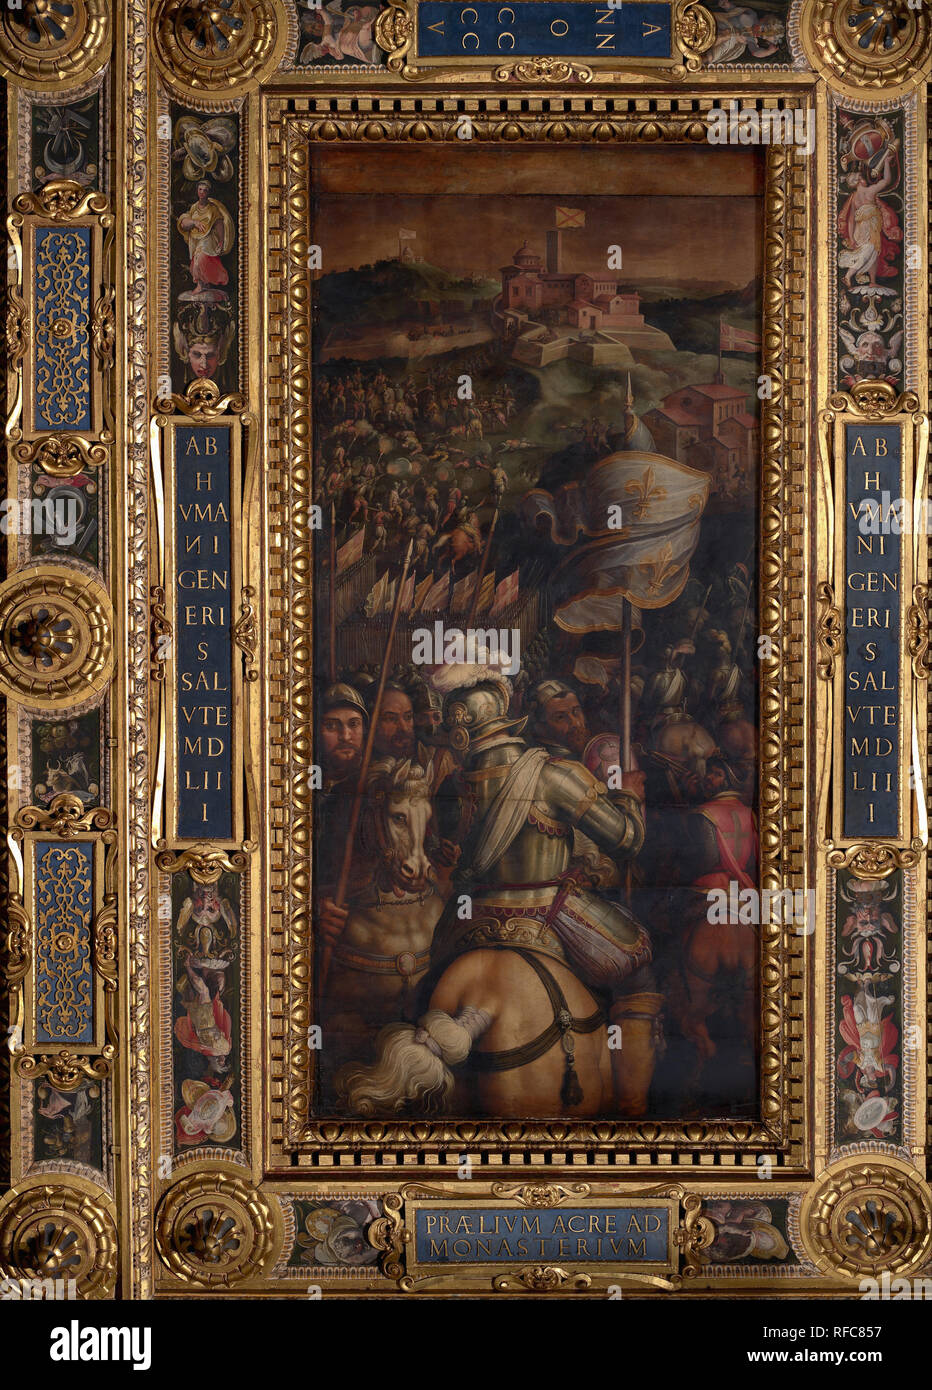 Storming of Monastero's fortress. Date/Period: 1563 - 1565. Oil painting on wood. Height: 540 mm (21.25 in); Width: 250 mm (9.84 in). Author: Giorgio Vasari. VASARI, GIORGIO. Stock Photo